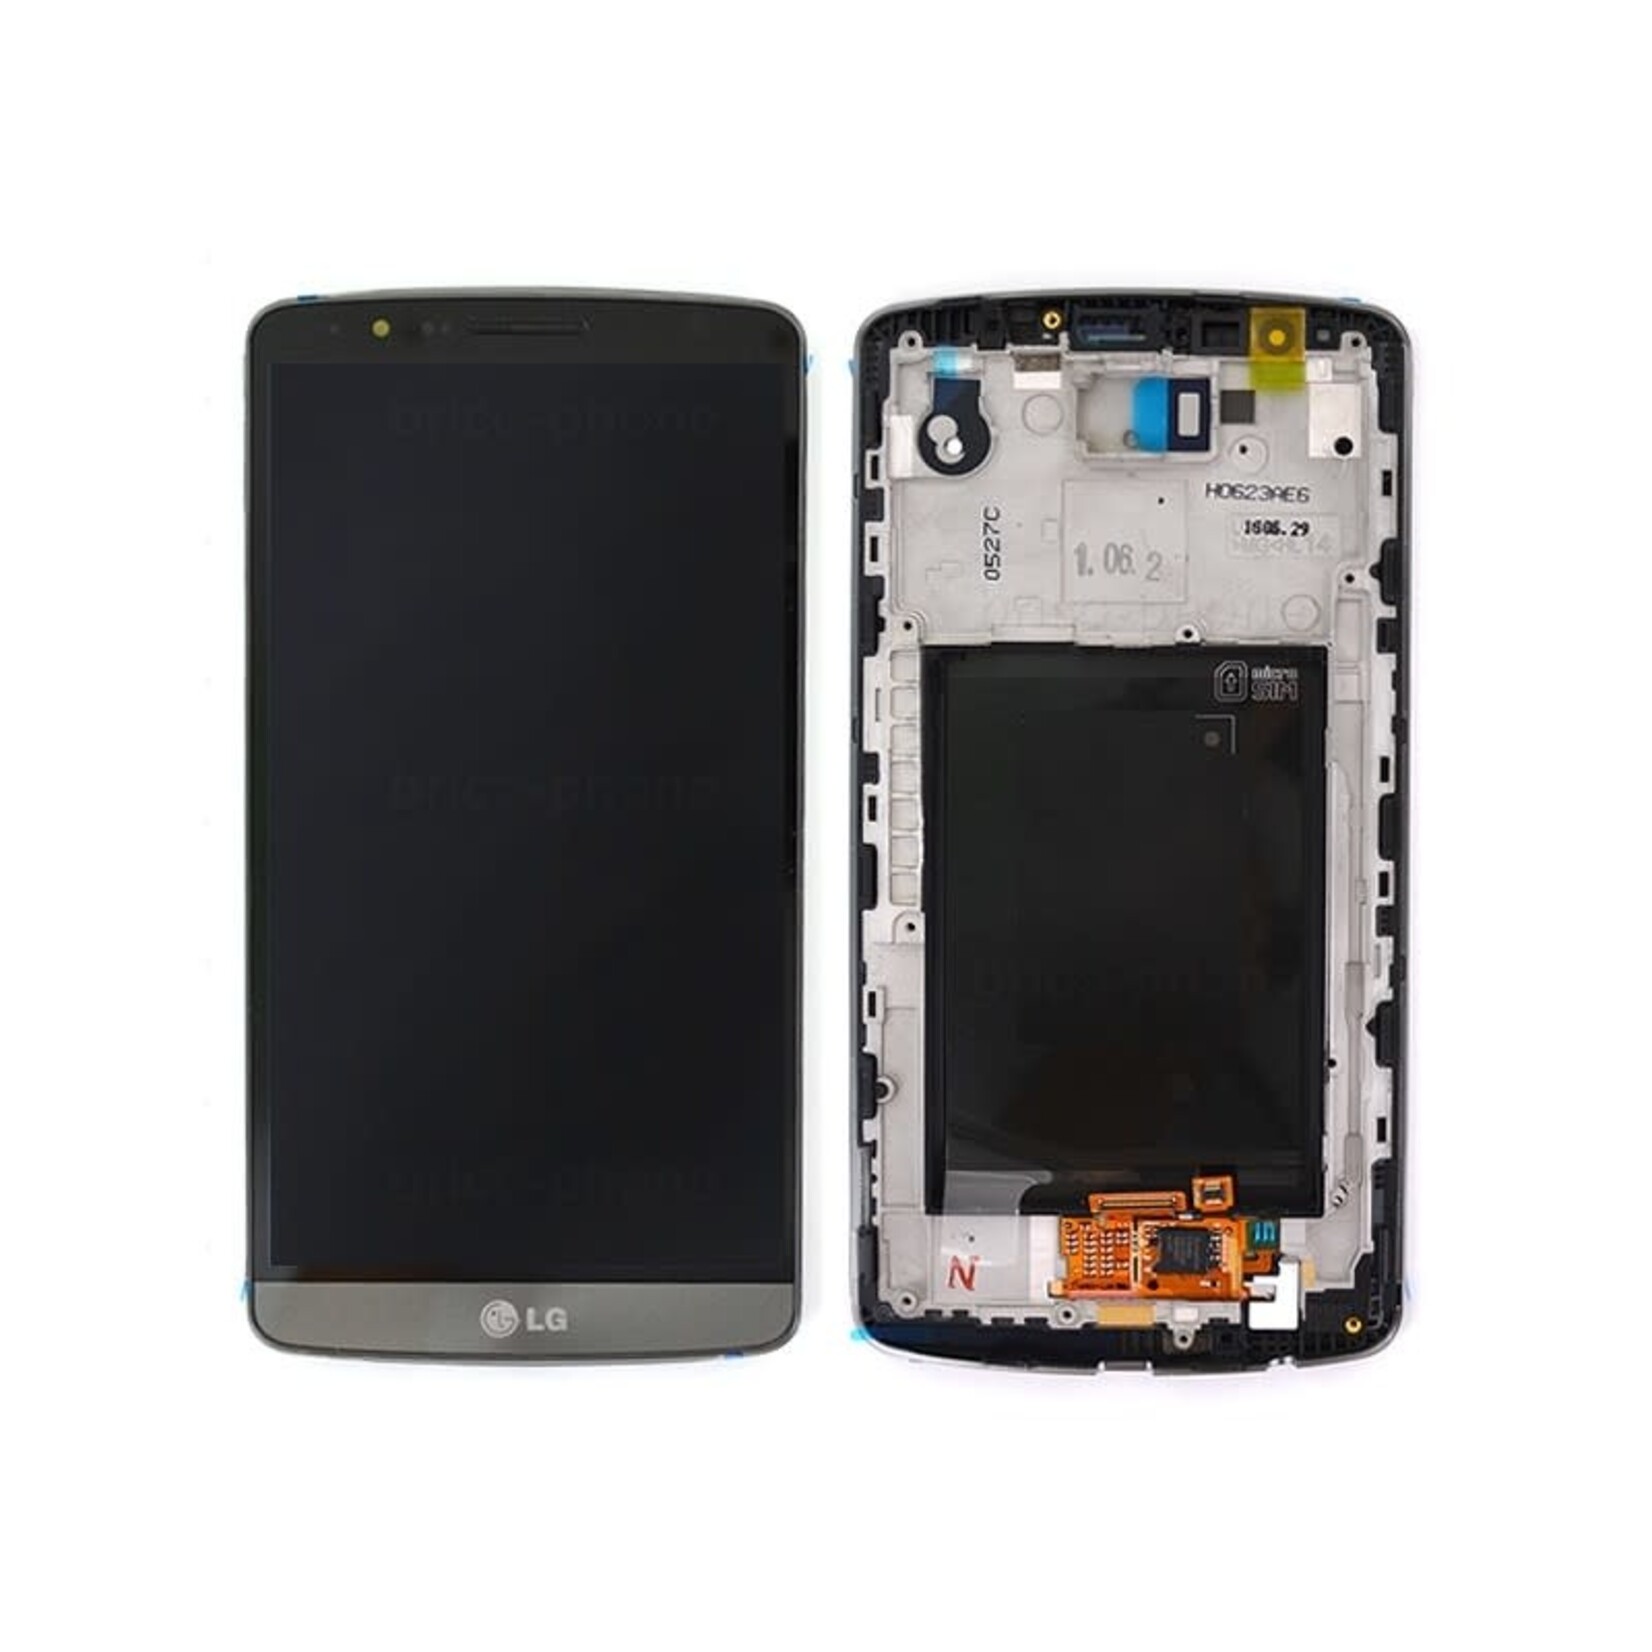 LG USAGÉ / USED - LCD DIGITIZER ASSEMBLY WITH FRAME LG G3